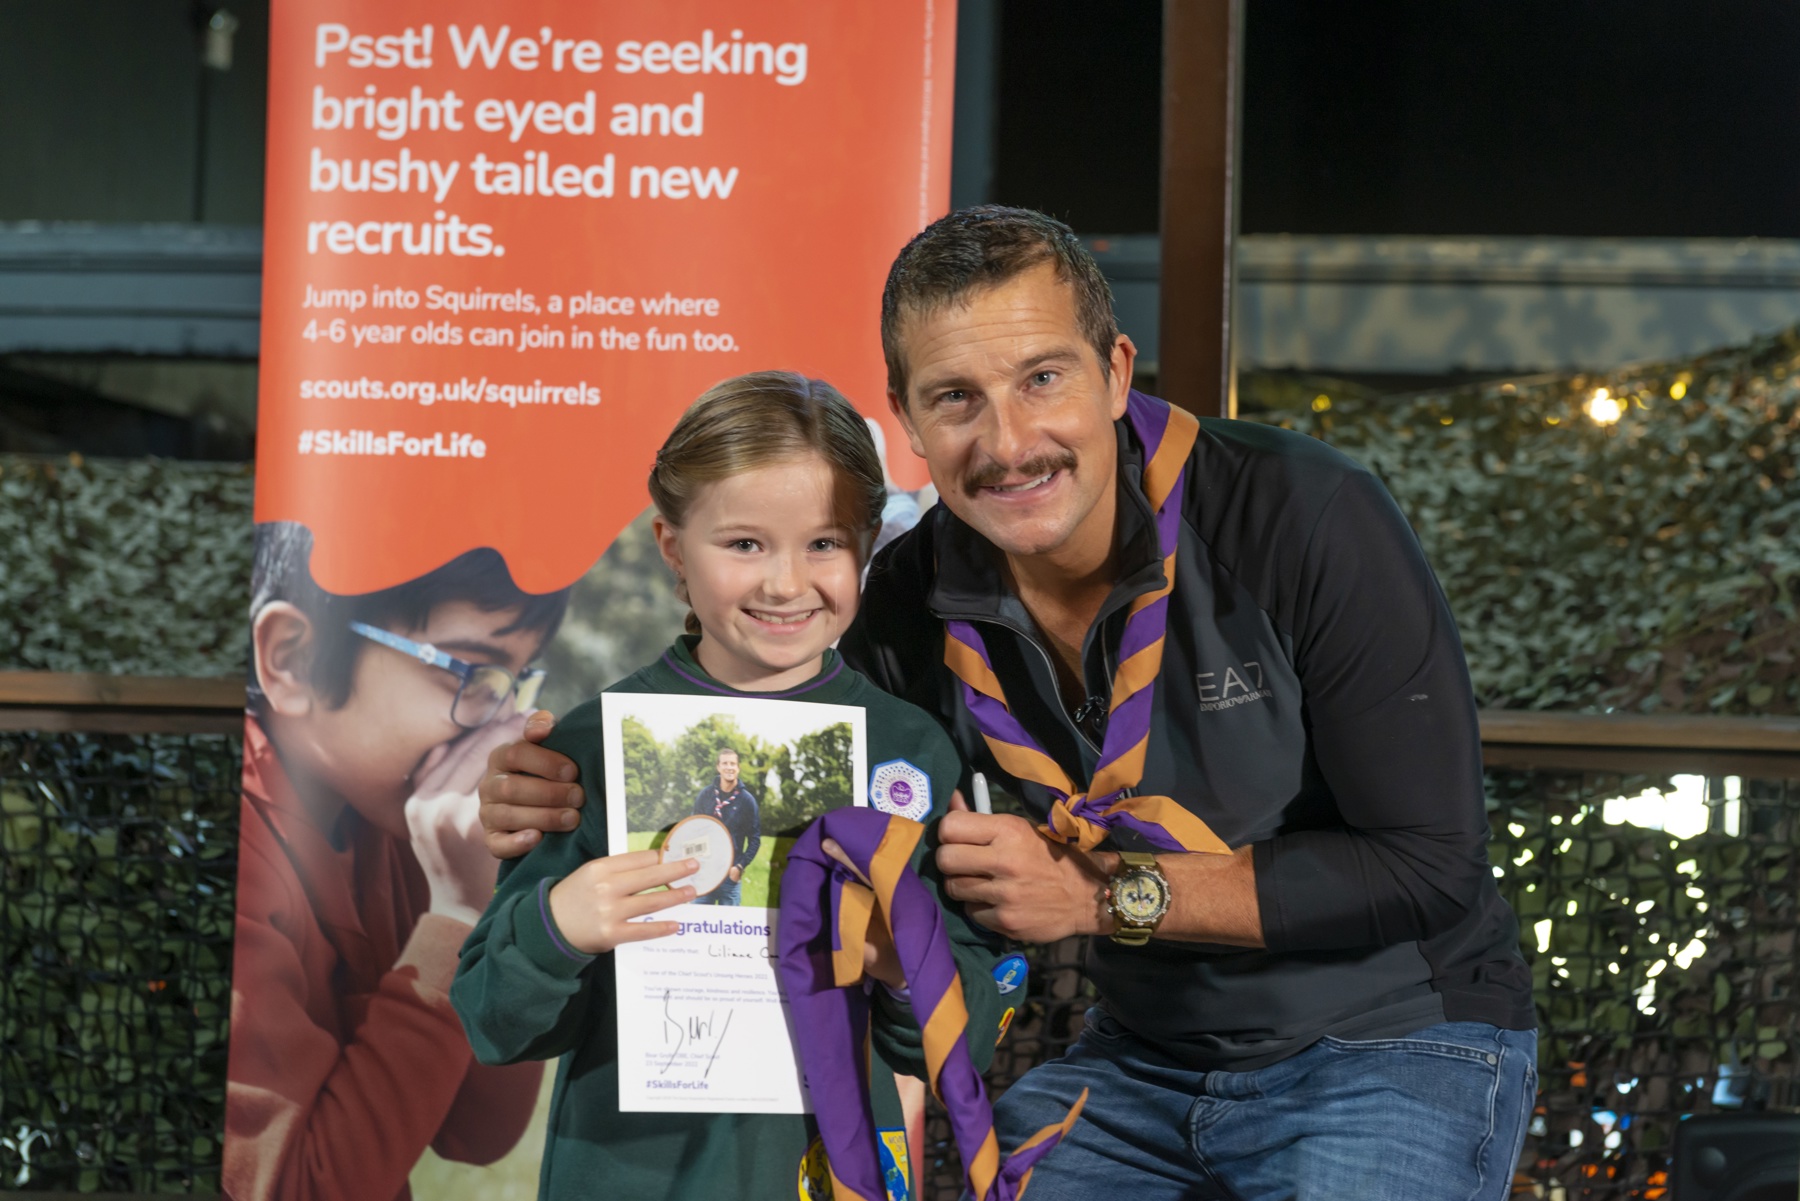 Lilianne is in her cubs uniform and stood with Bear Grylls. They're both smiling. Lilianne is holding her certificate, and Never Give Up badge and necker.